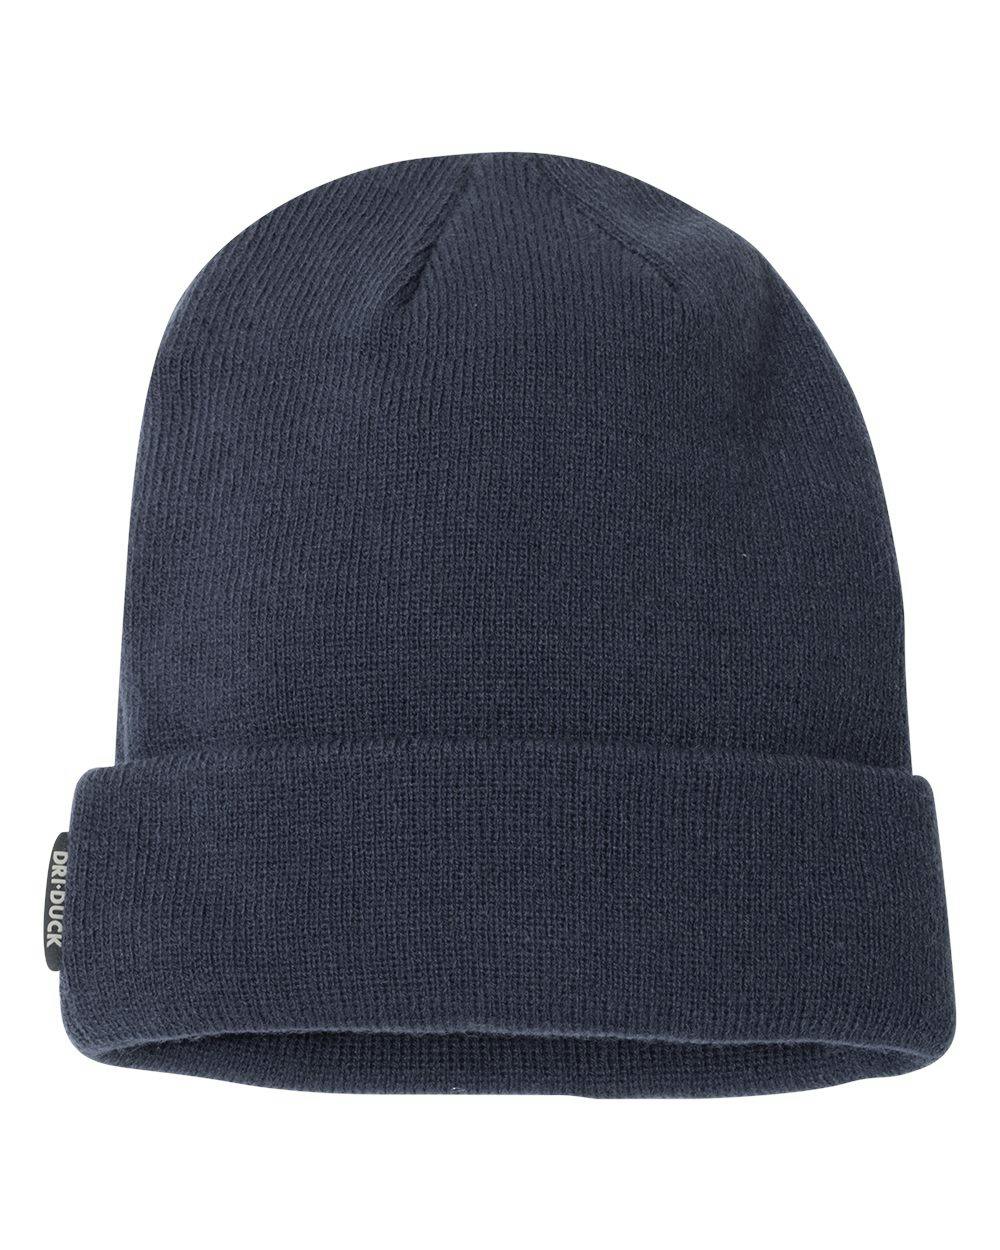 Image for 12" Basecamp Performance Cuffed Beanie - 3562